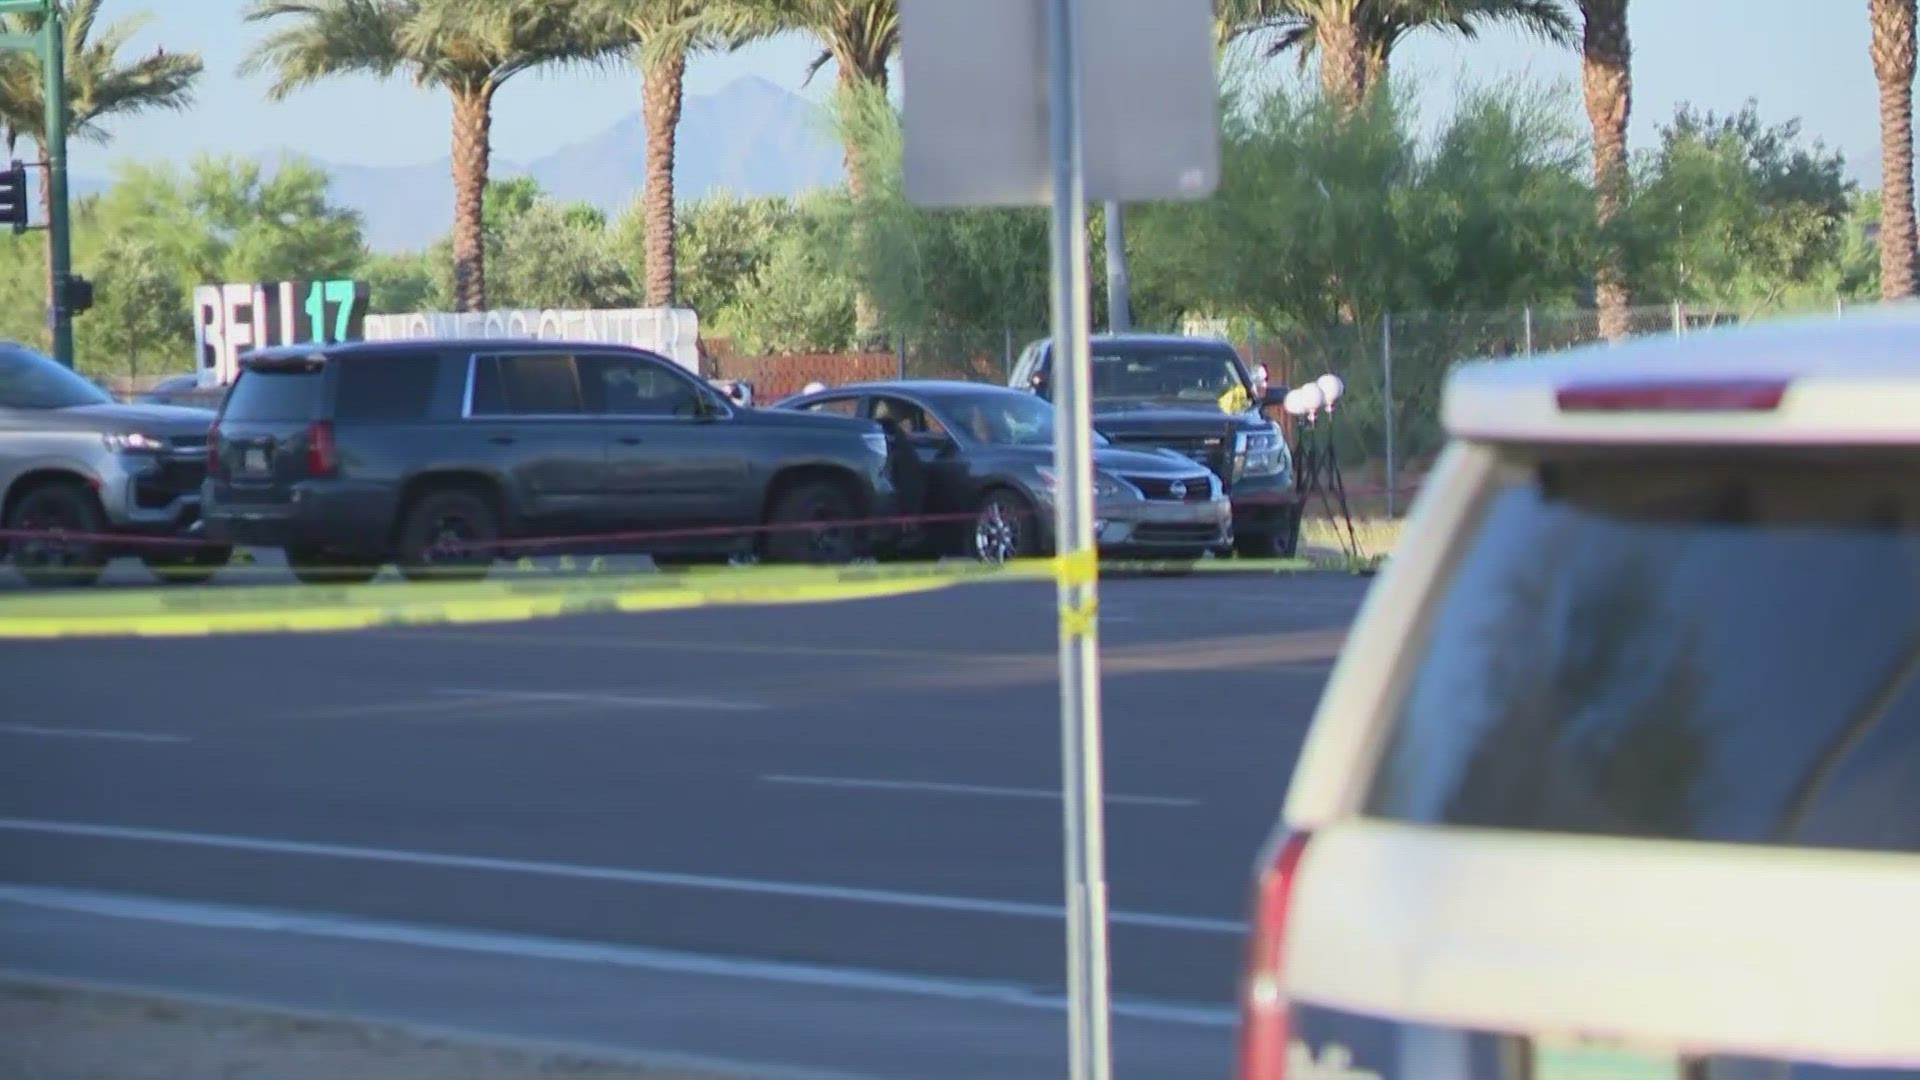 Three officers shot a woman in Phoenix Monday evening after she allegedly failed to yield at a traffic stop and pointed a gun at them, police said.